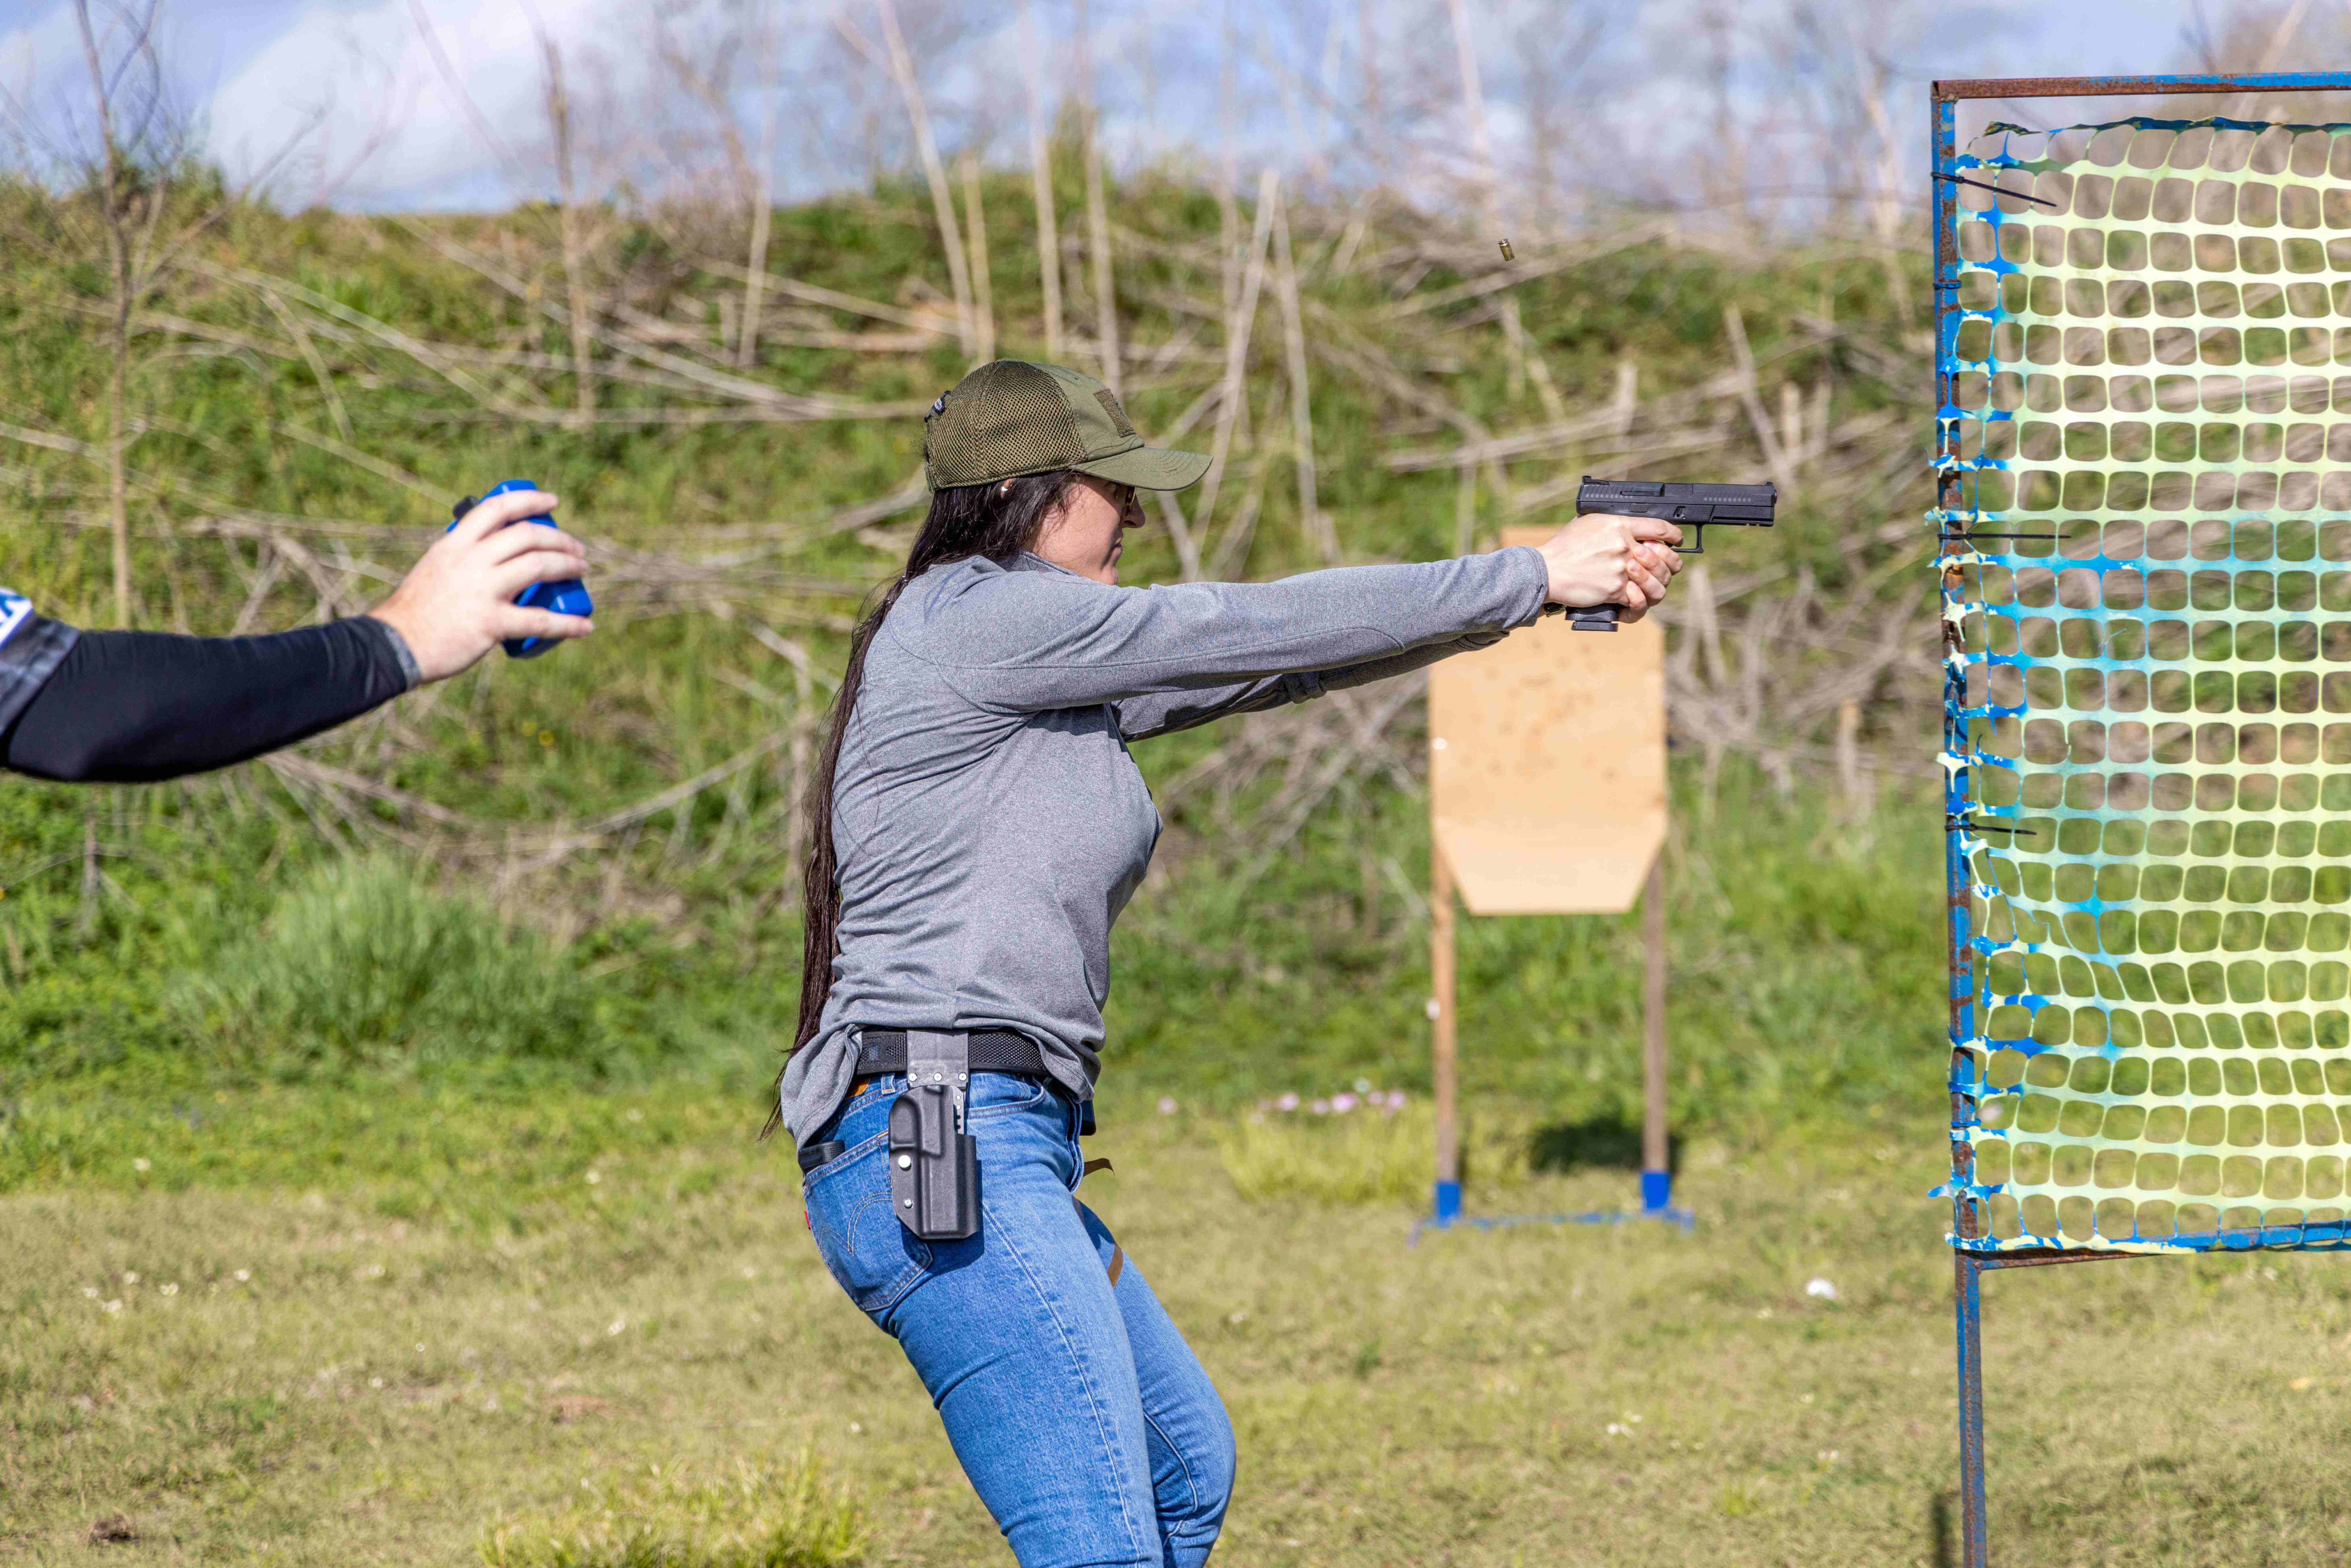 Shooting sports for women 3